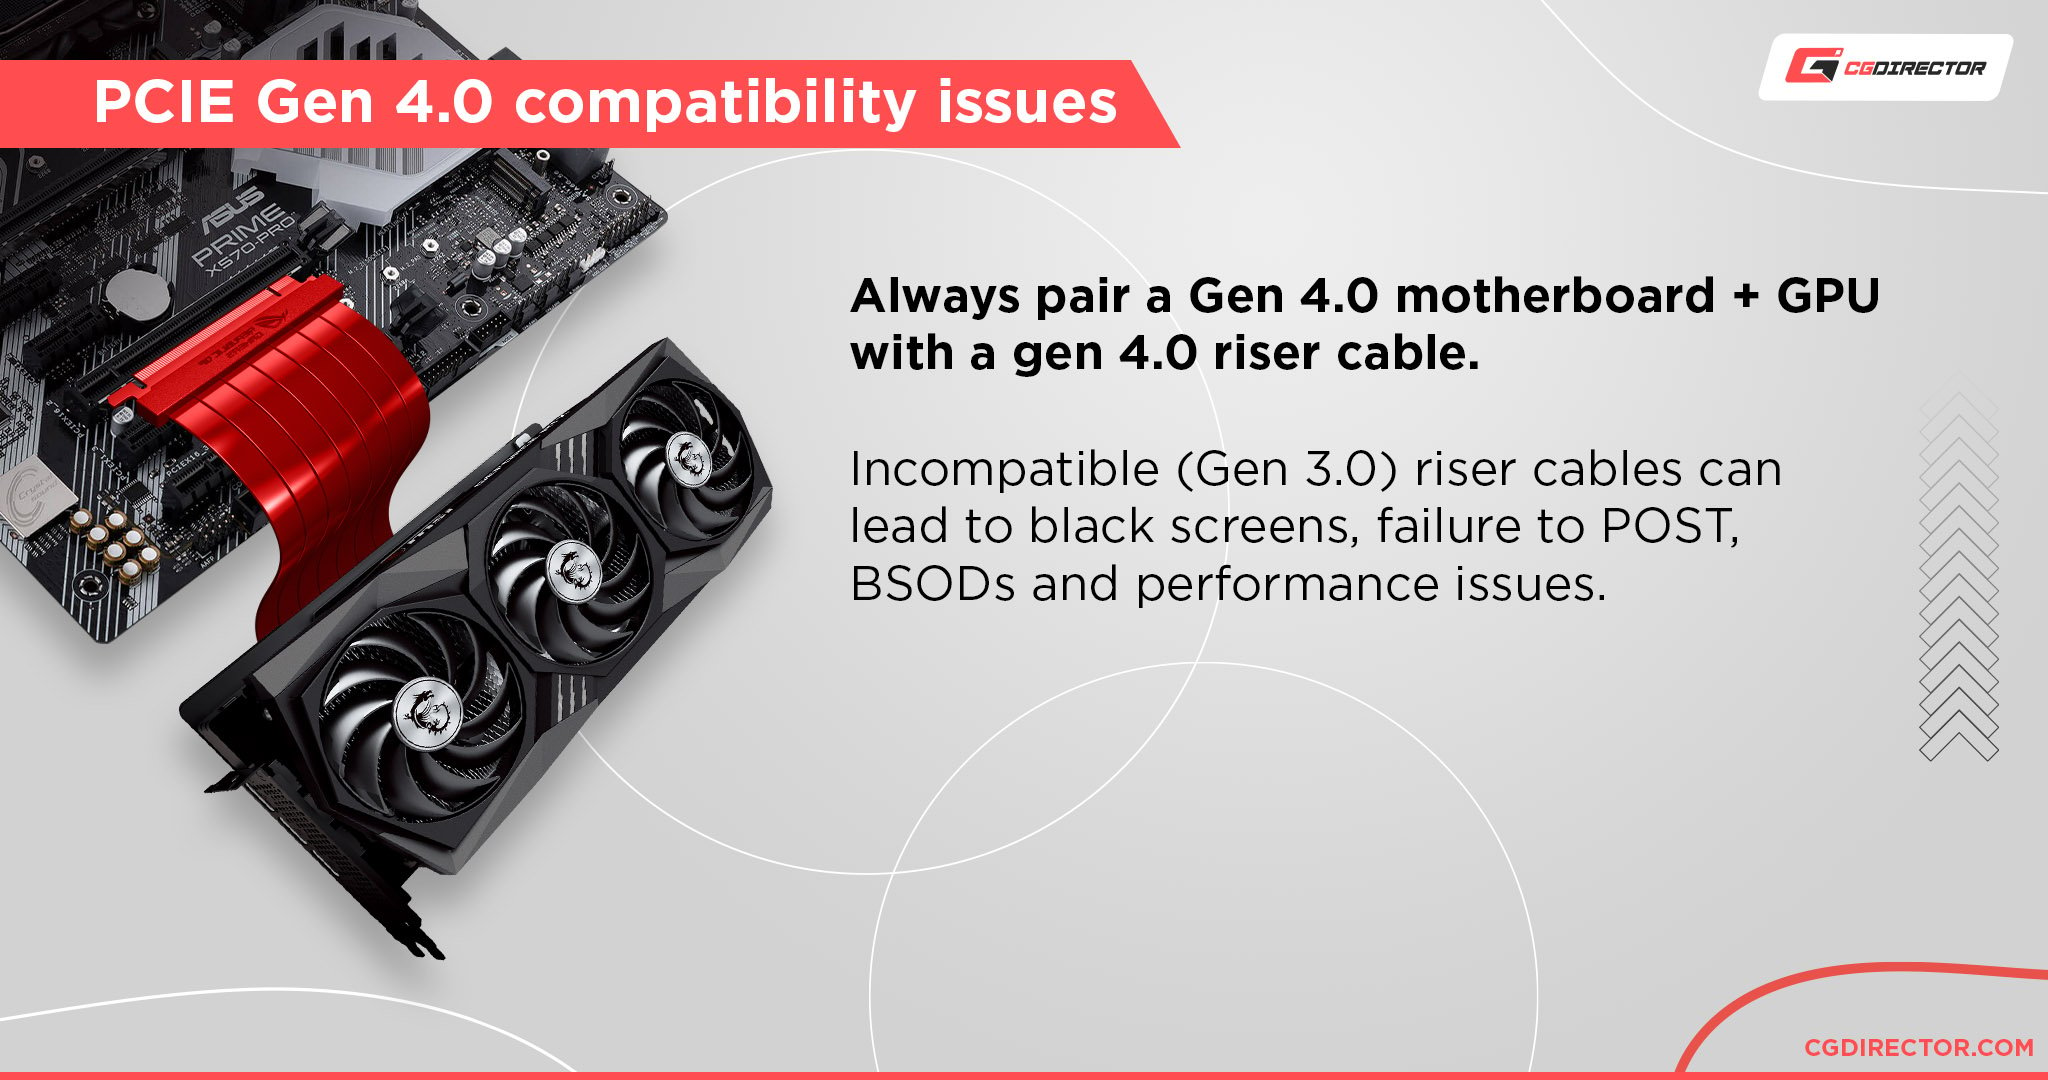 PCIE Gen 4.0 compatibility issues